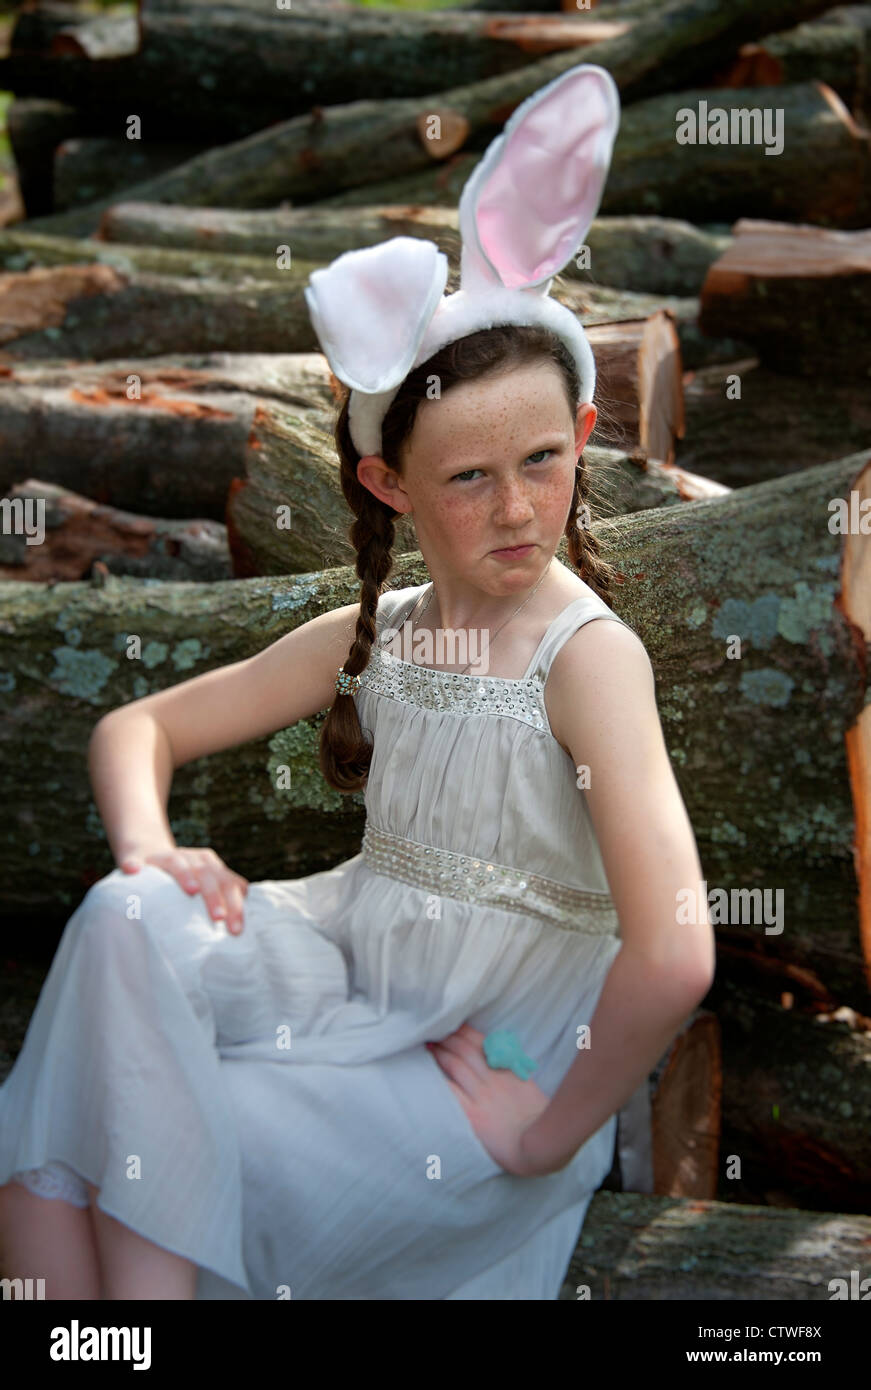 Young girl posing with Easter dress and bunny ears. Stock Photo